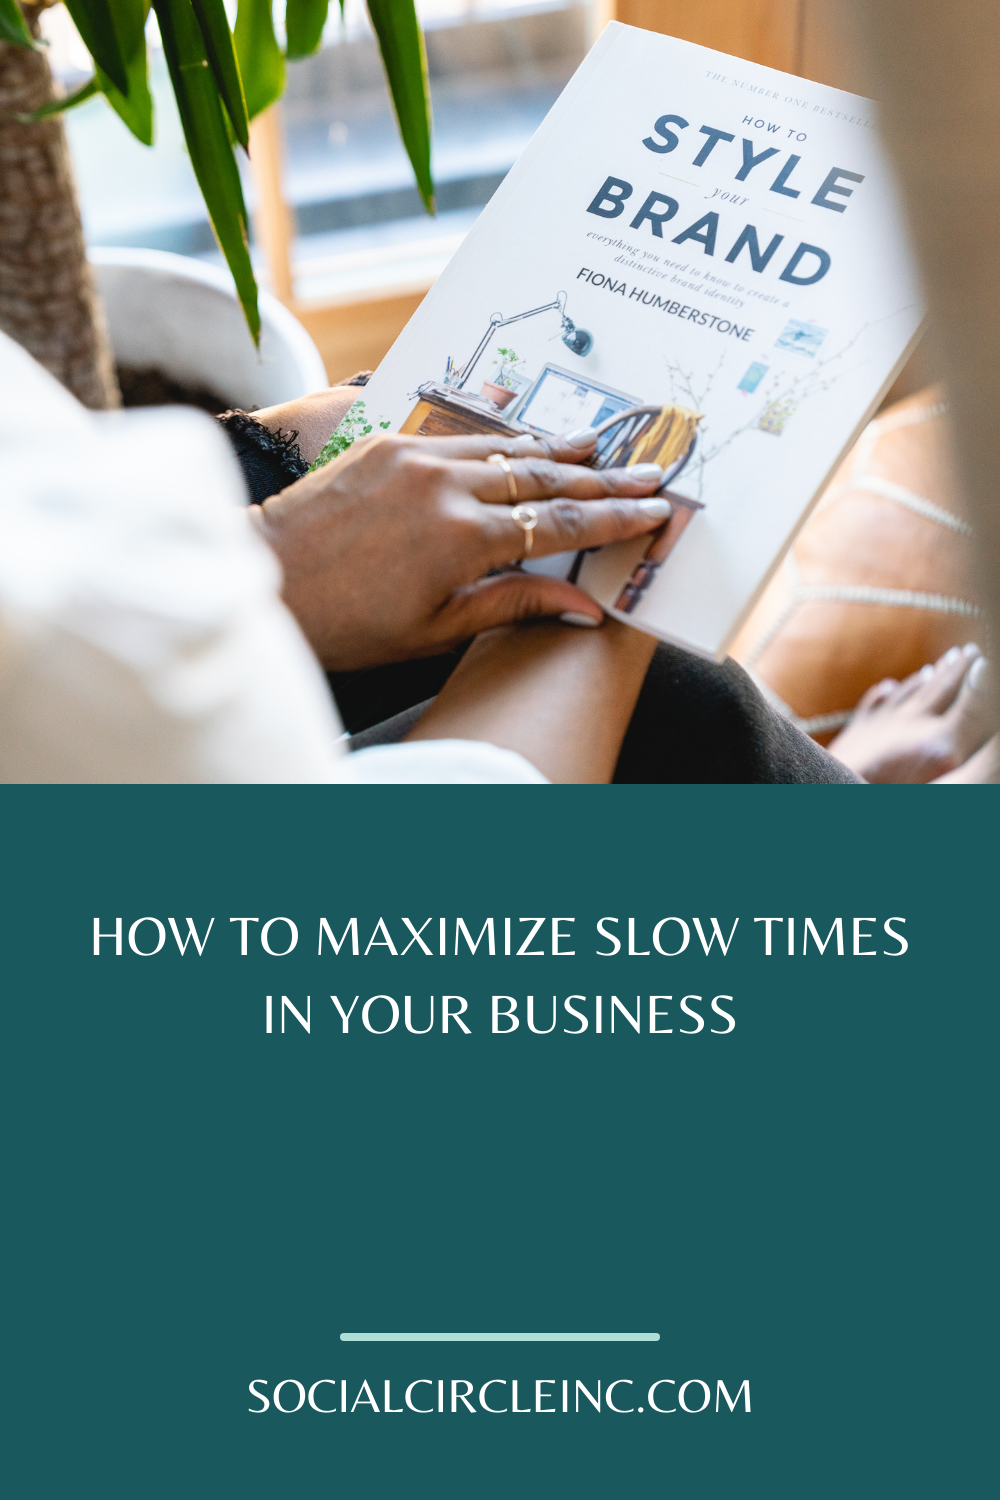 How to Maximize Slow Times in Your Business